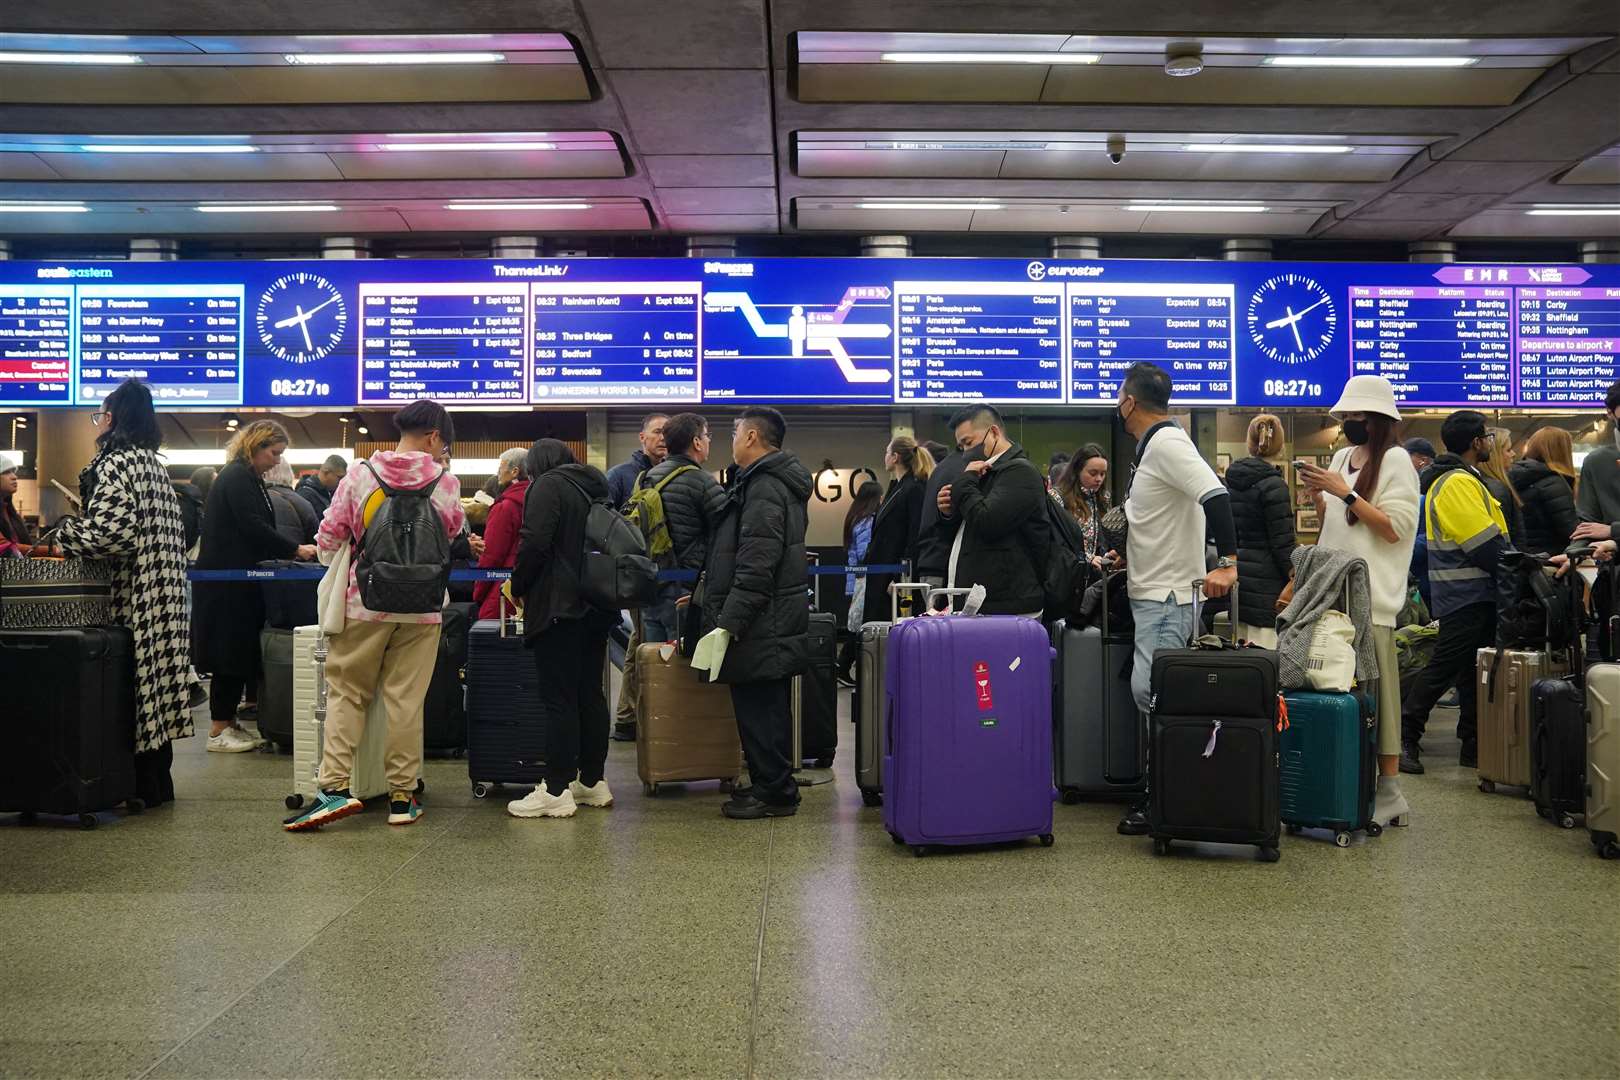 Passengers queue at St Pancras International station in London as Christmas getaway disruption is expected to continue (Lucy North/PA)